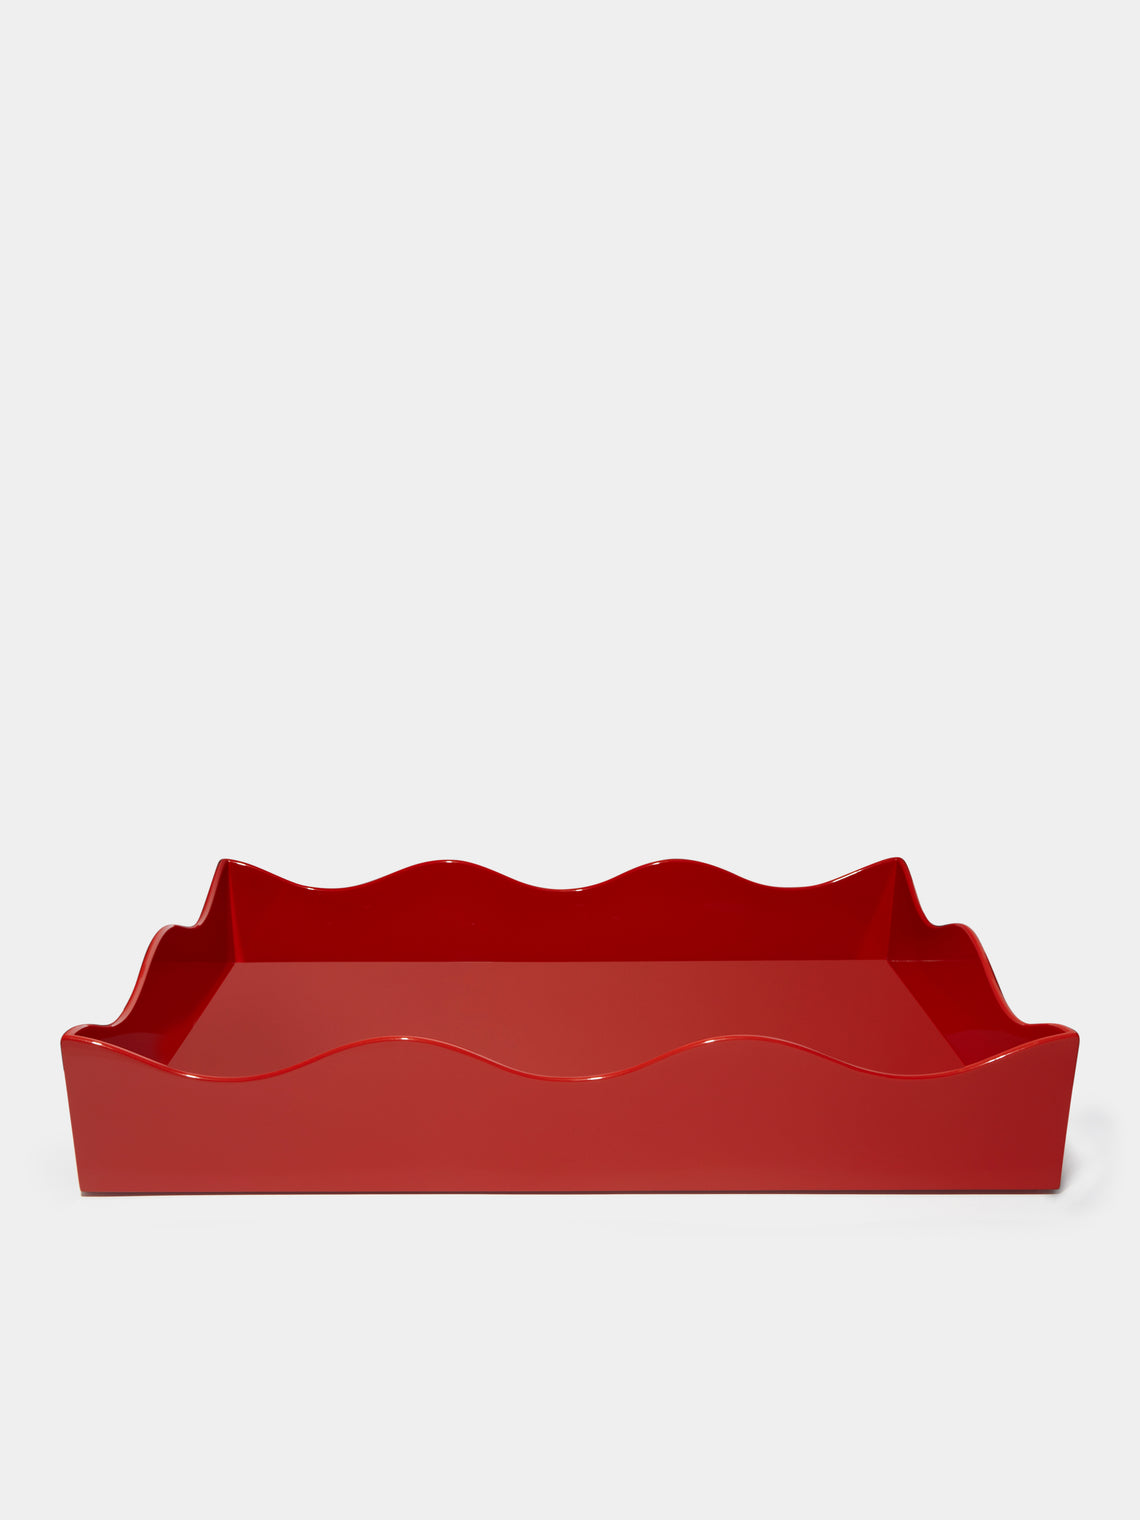 The Lacquer Company - Belles Rives Lacquered Large Tray -  - ABASK